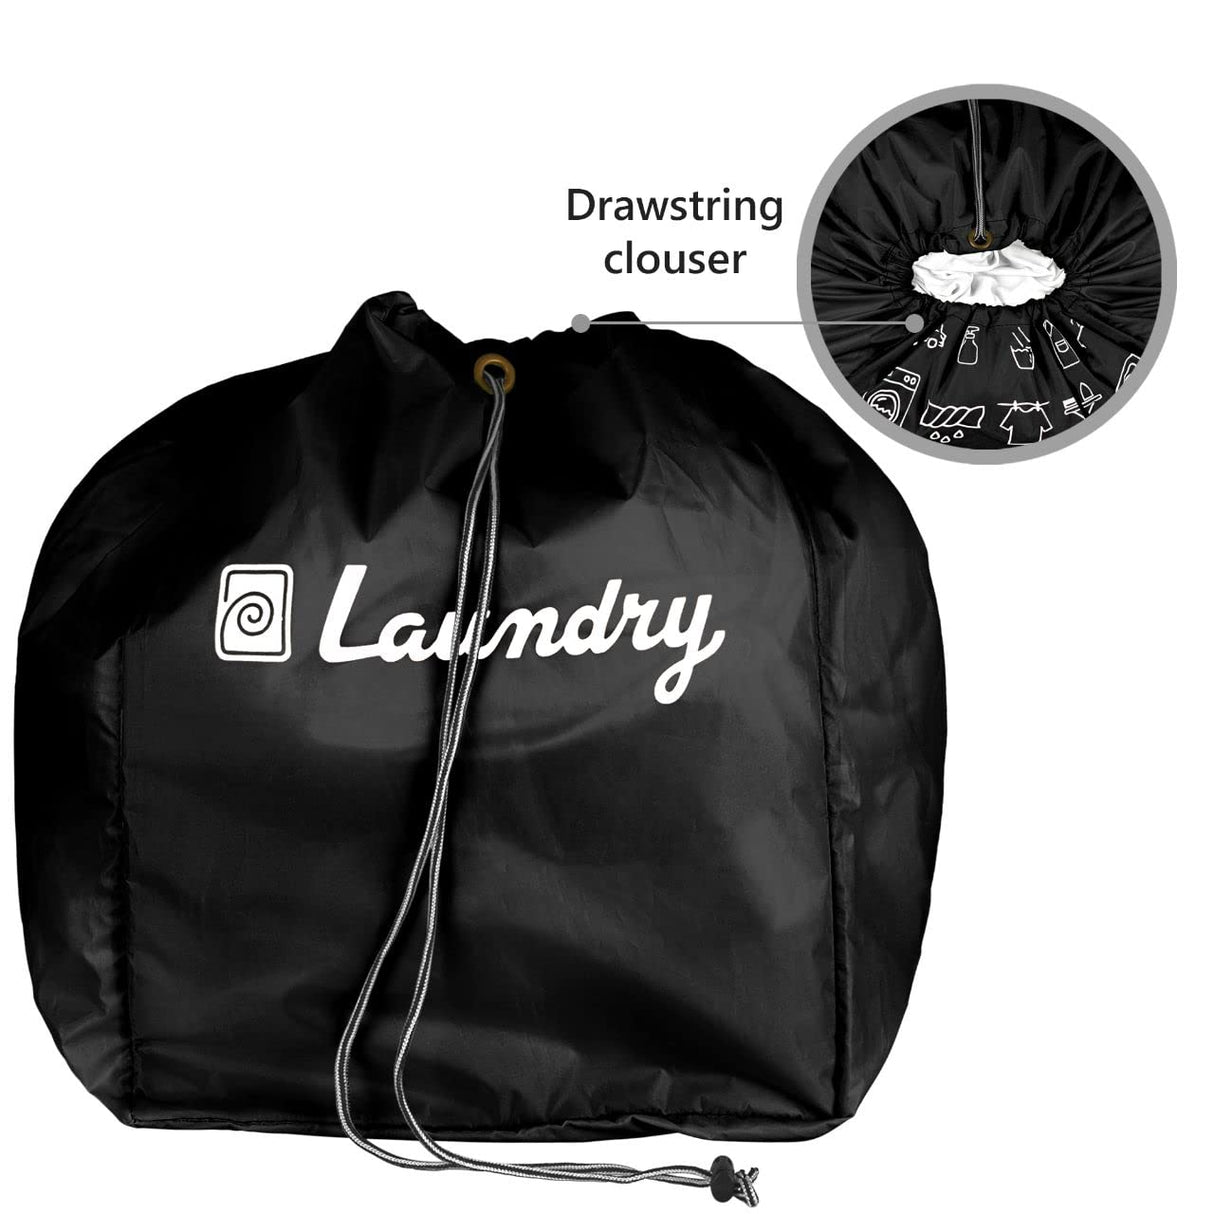 Laundry Bags with Drawstring Closure - 13x20 inches